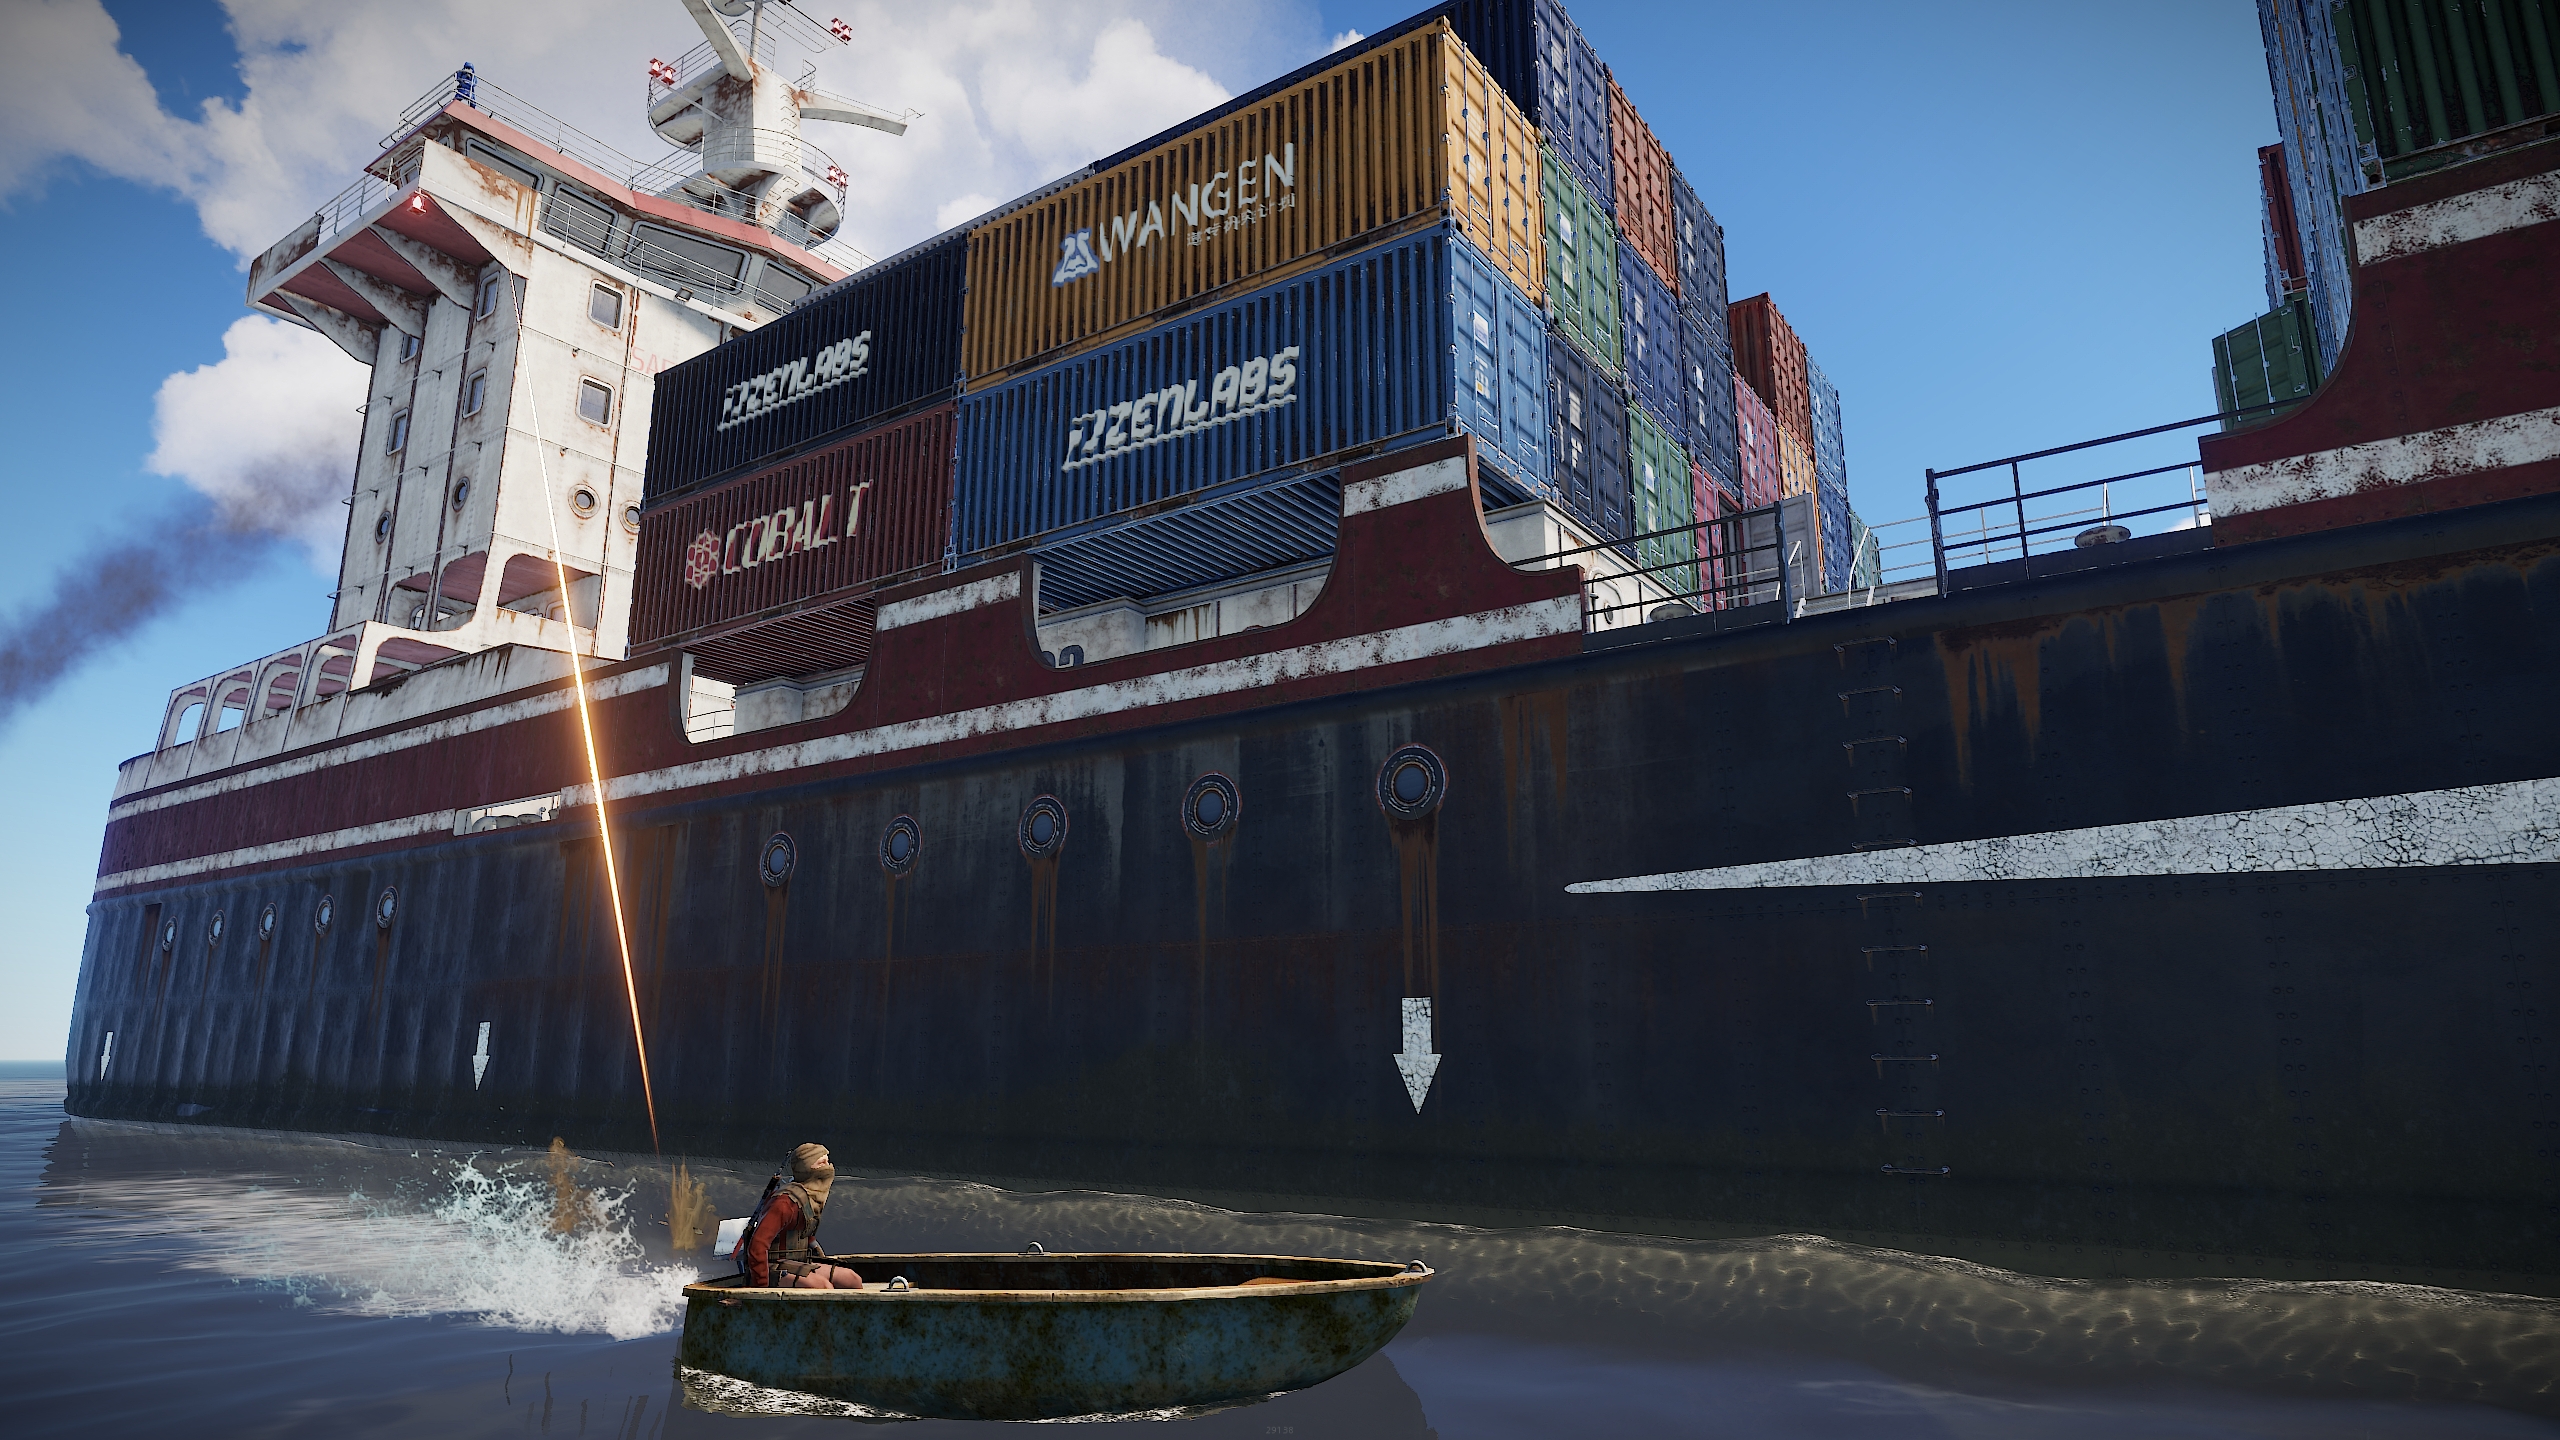 Rust cargo. Карго раст. Карго шип раст. Карго корабль в расте. Грузовое судно раст.